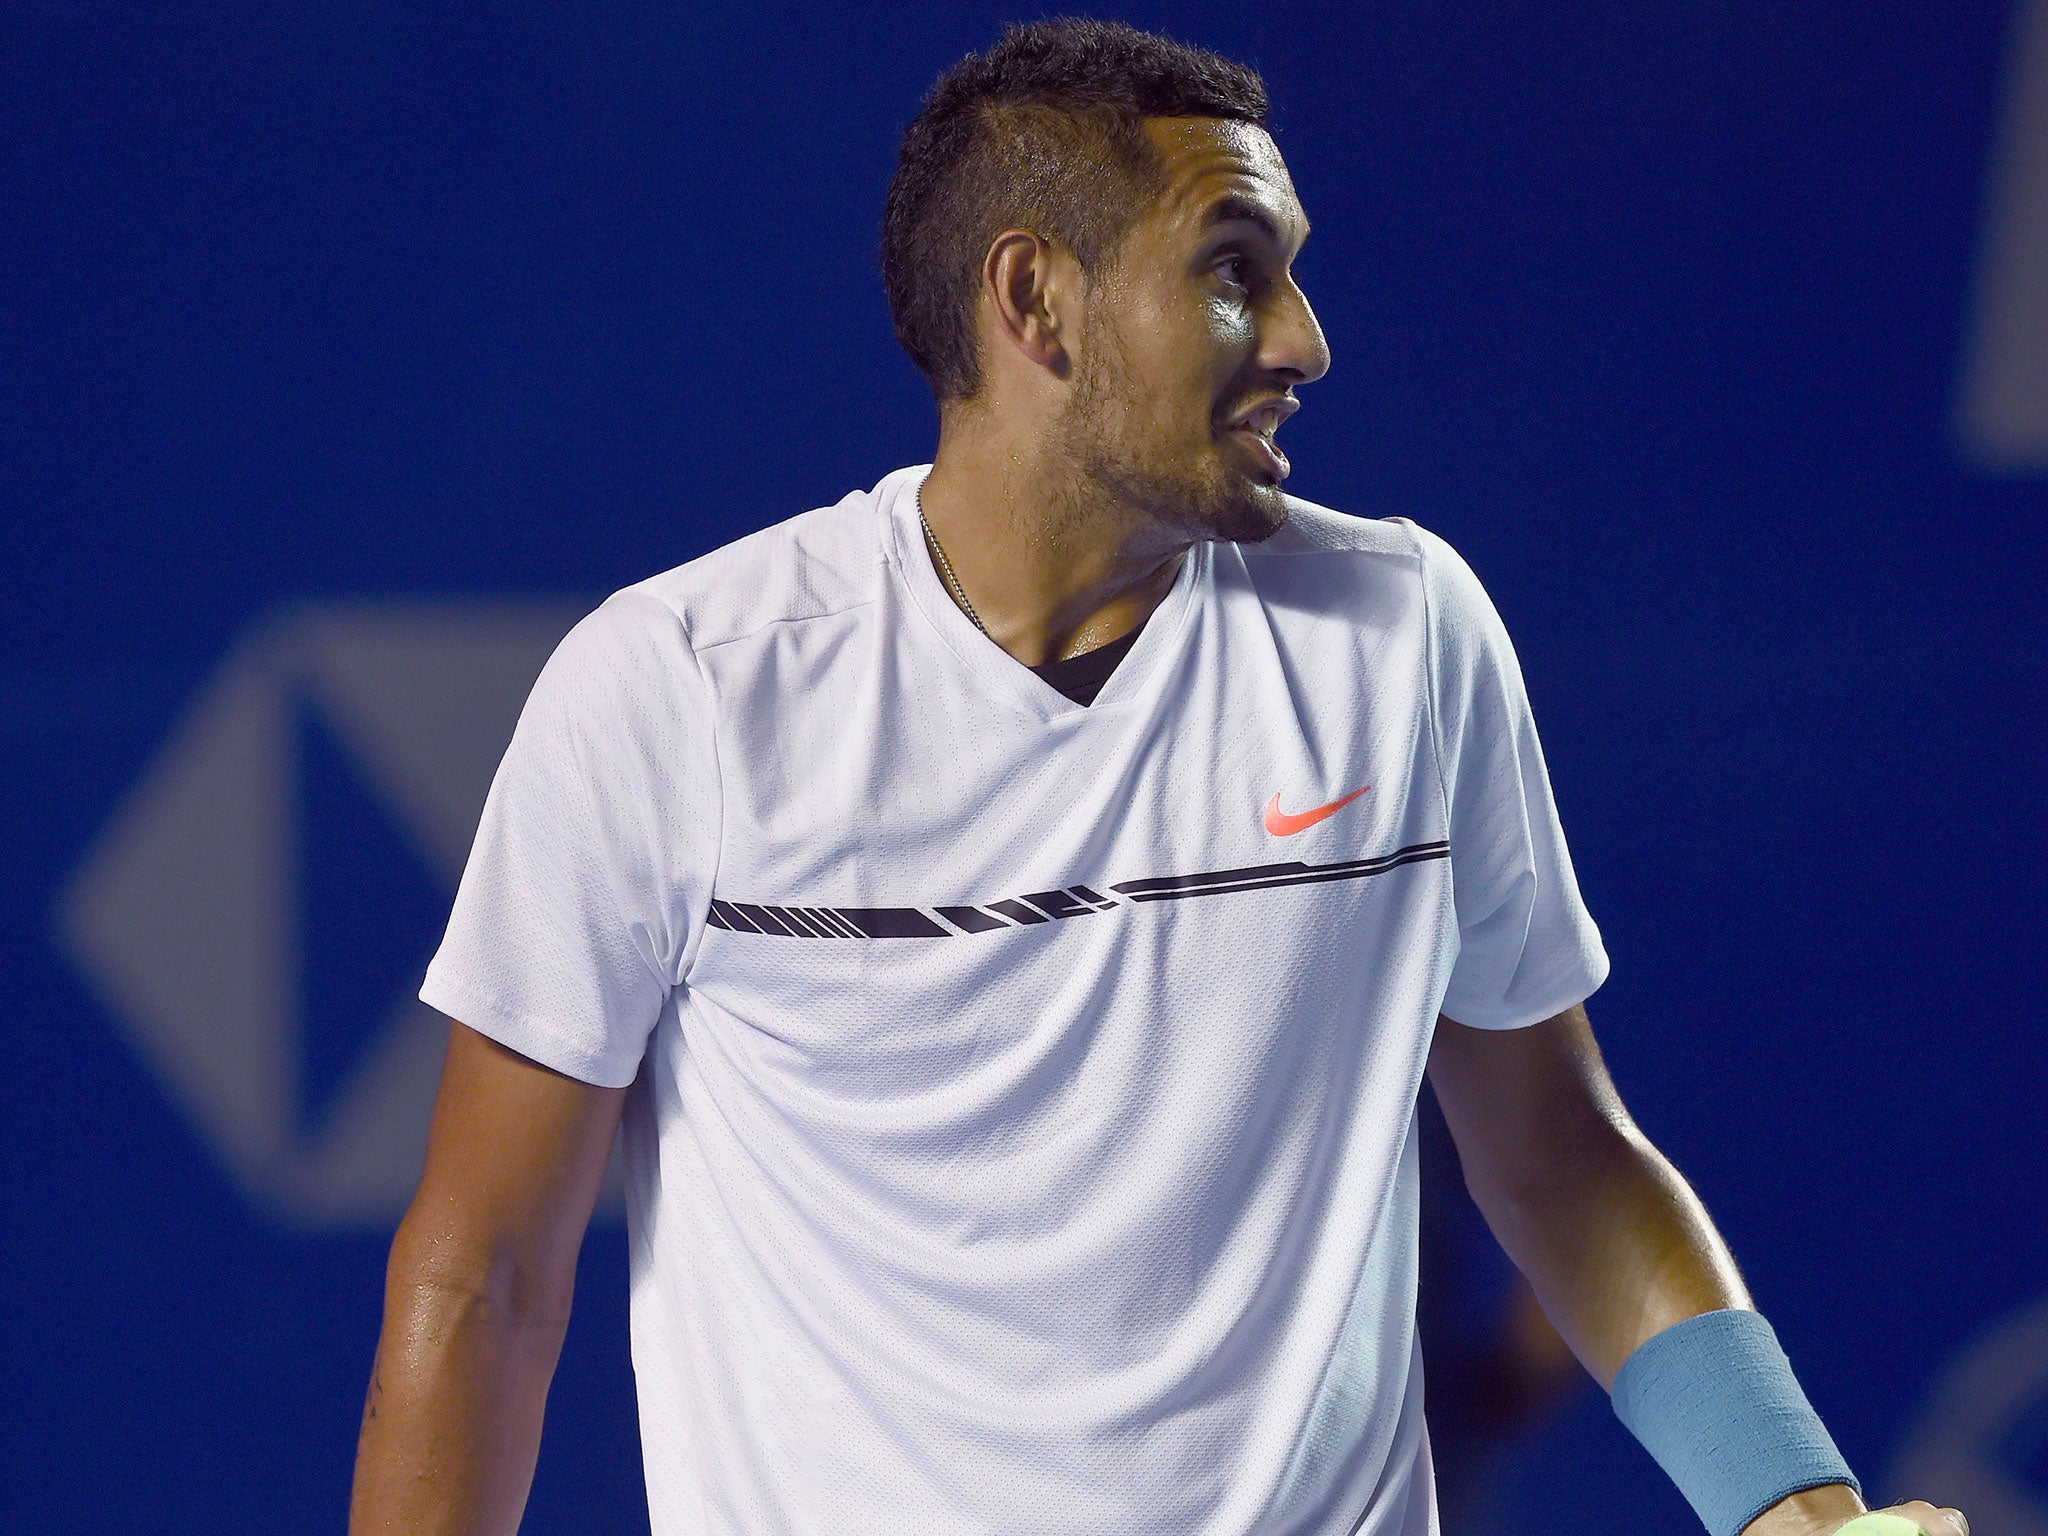 Kyrgios won the first set on a tie-break before clinching the second by breaking Djokovic